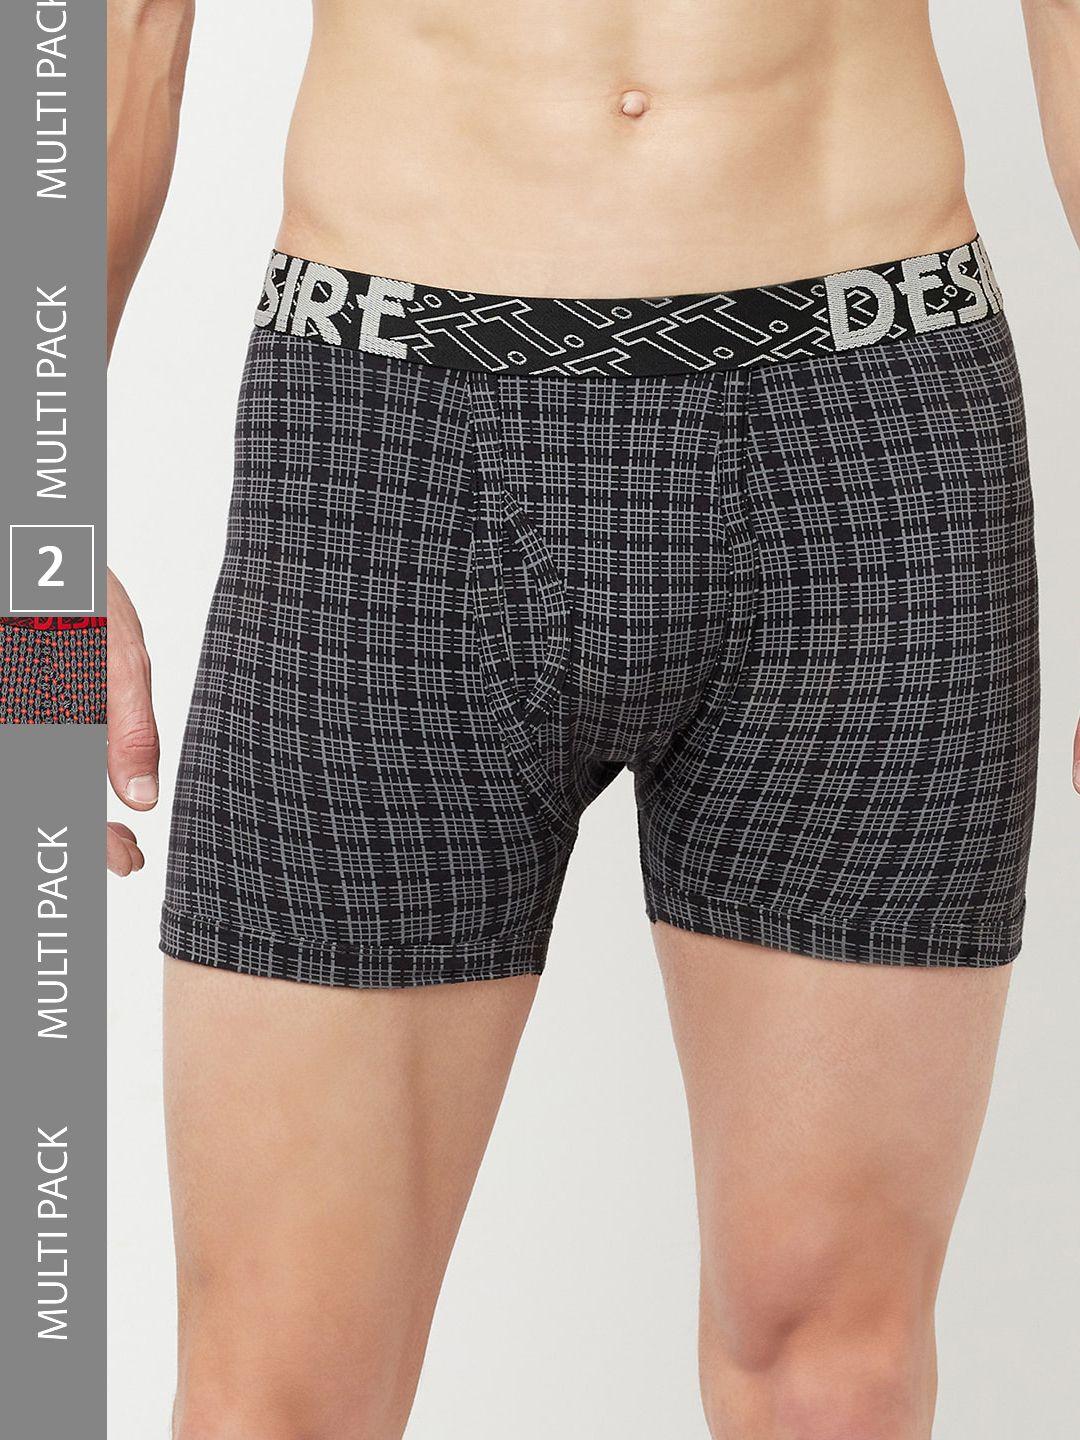 t.t. pack of 4 cotton trunks